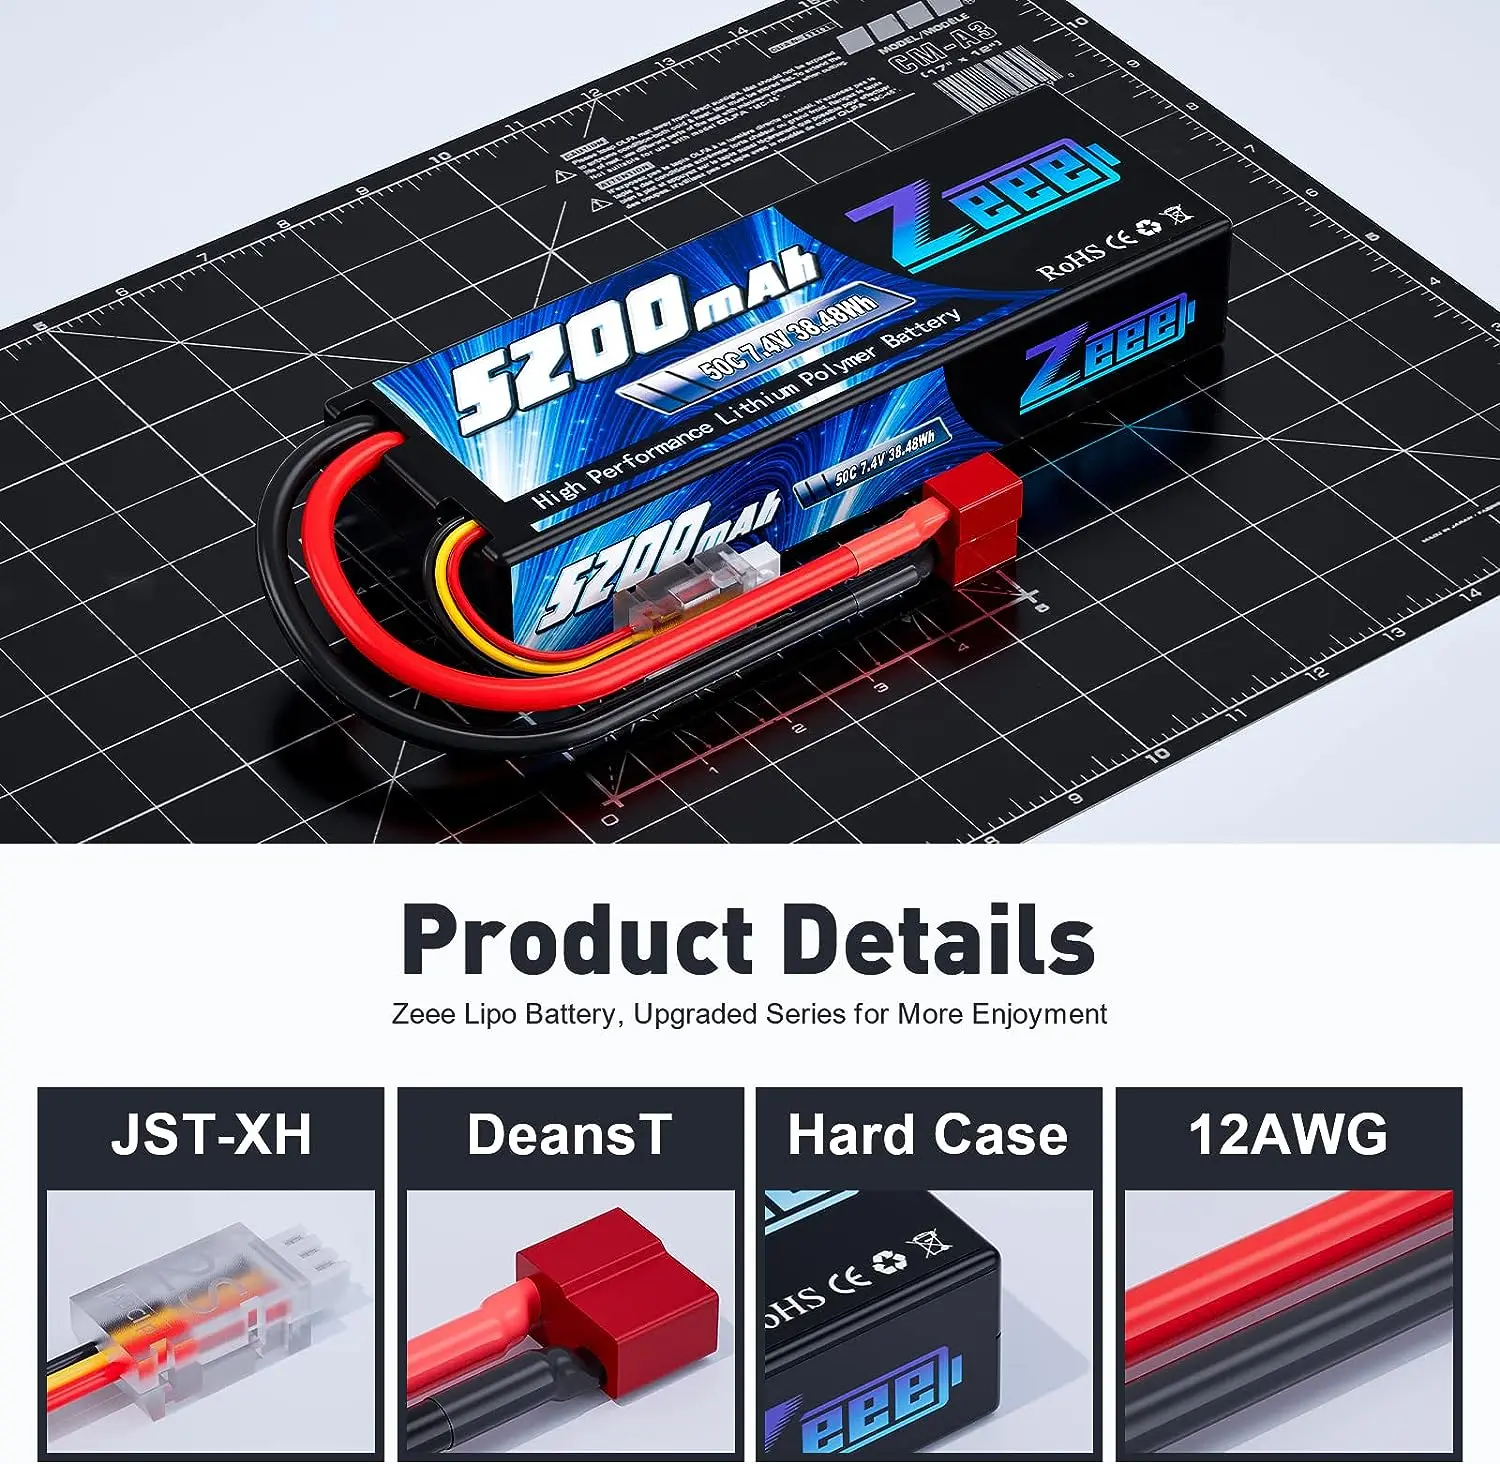 3S Battery Lipo,2 Packs 11.1V Lipo Battery 5200mAh with Tr Plug for RC  Car/Truck, Boat,Drone,Buggy,Truggy,RC Helicopter, RC Airplane,UAV, FPV  (Short)